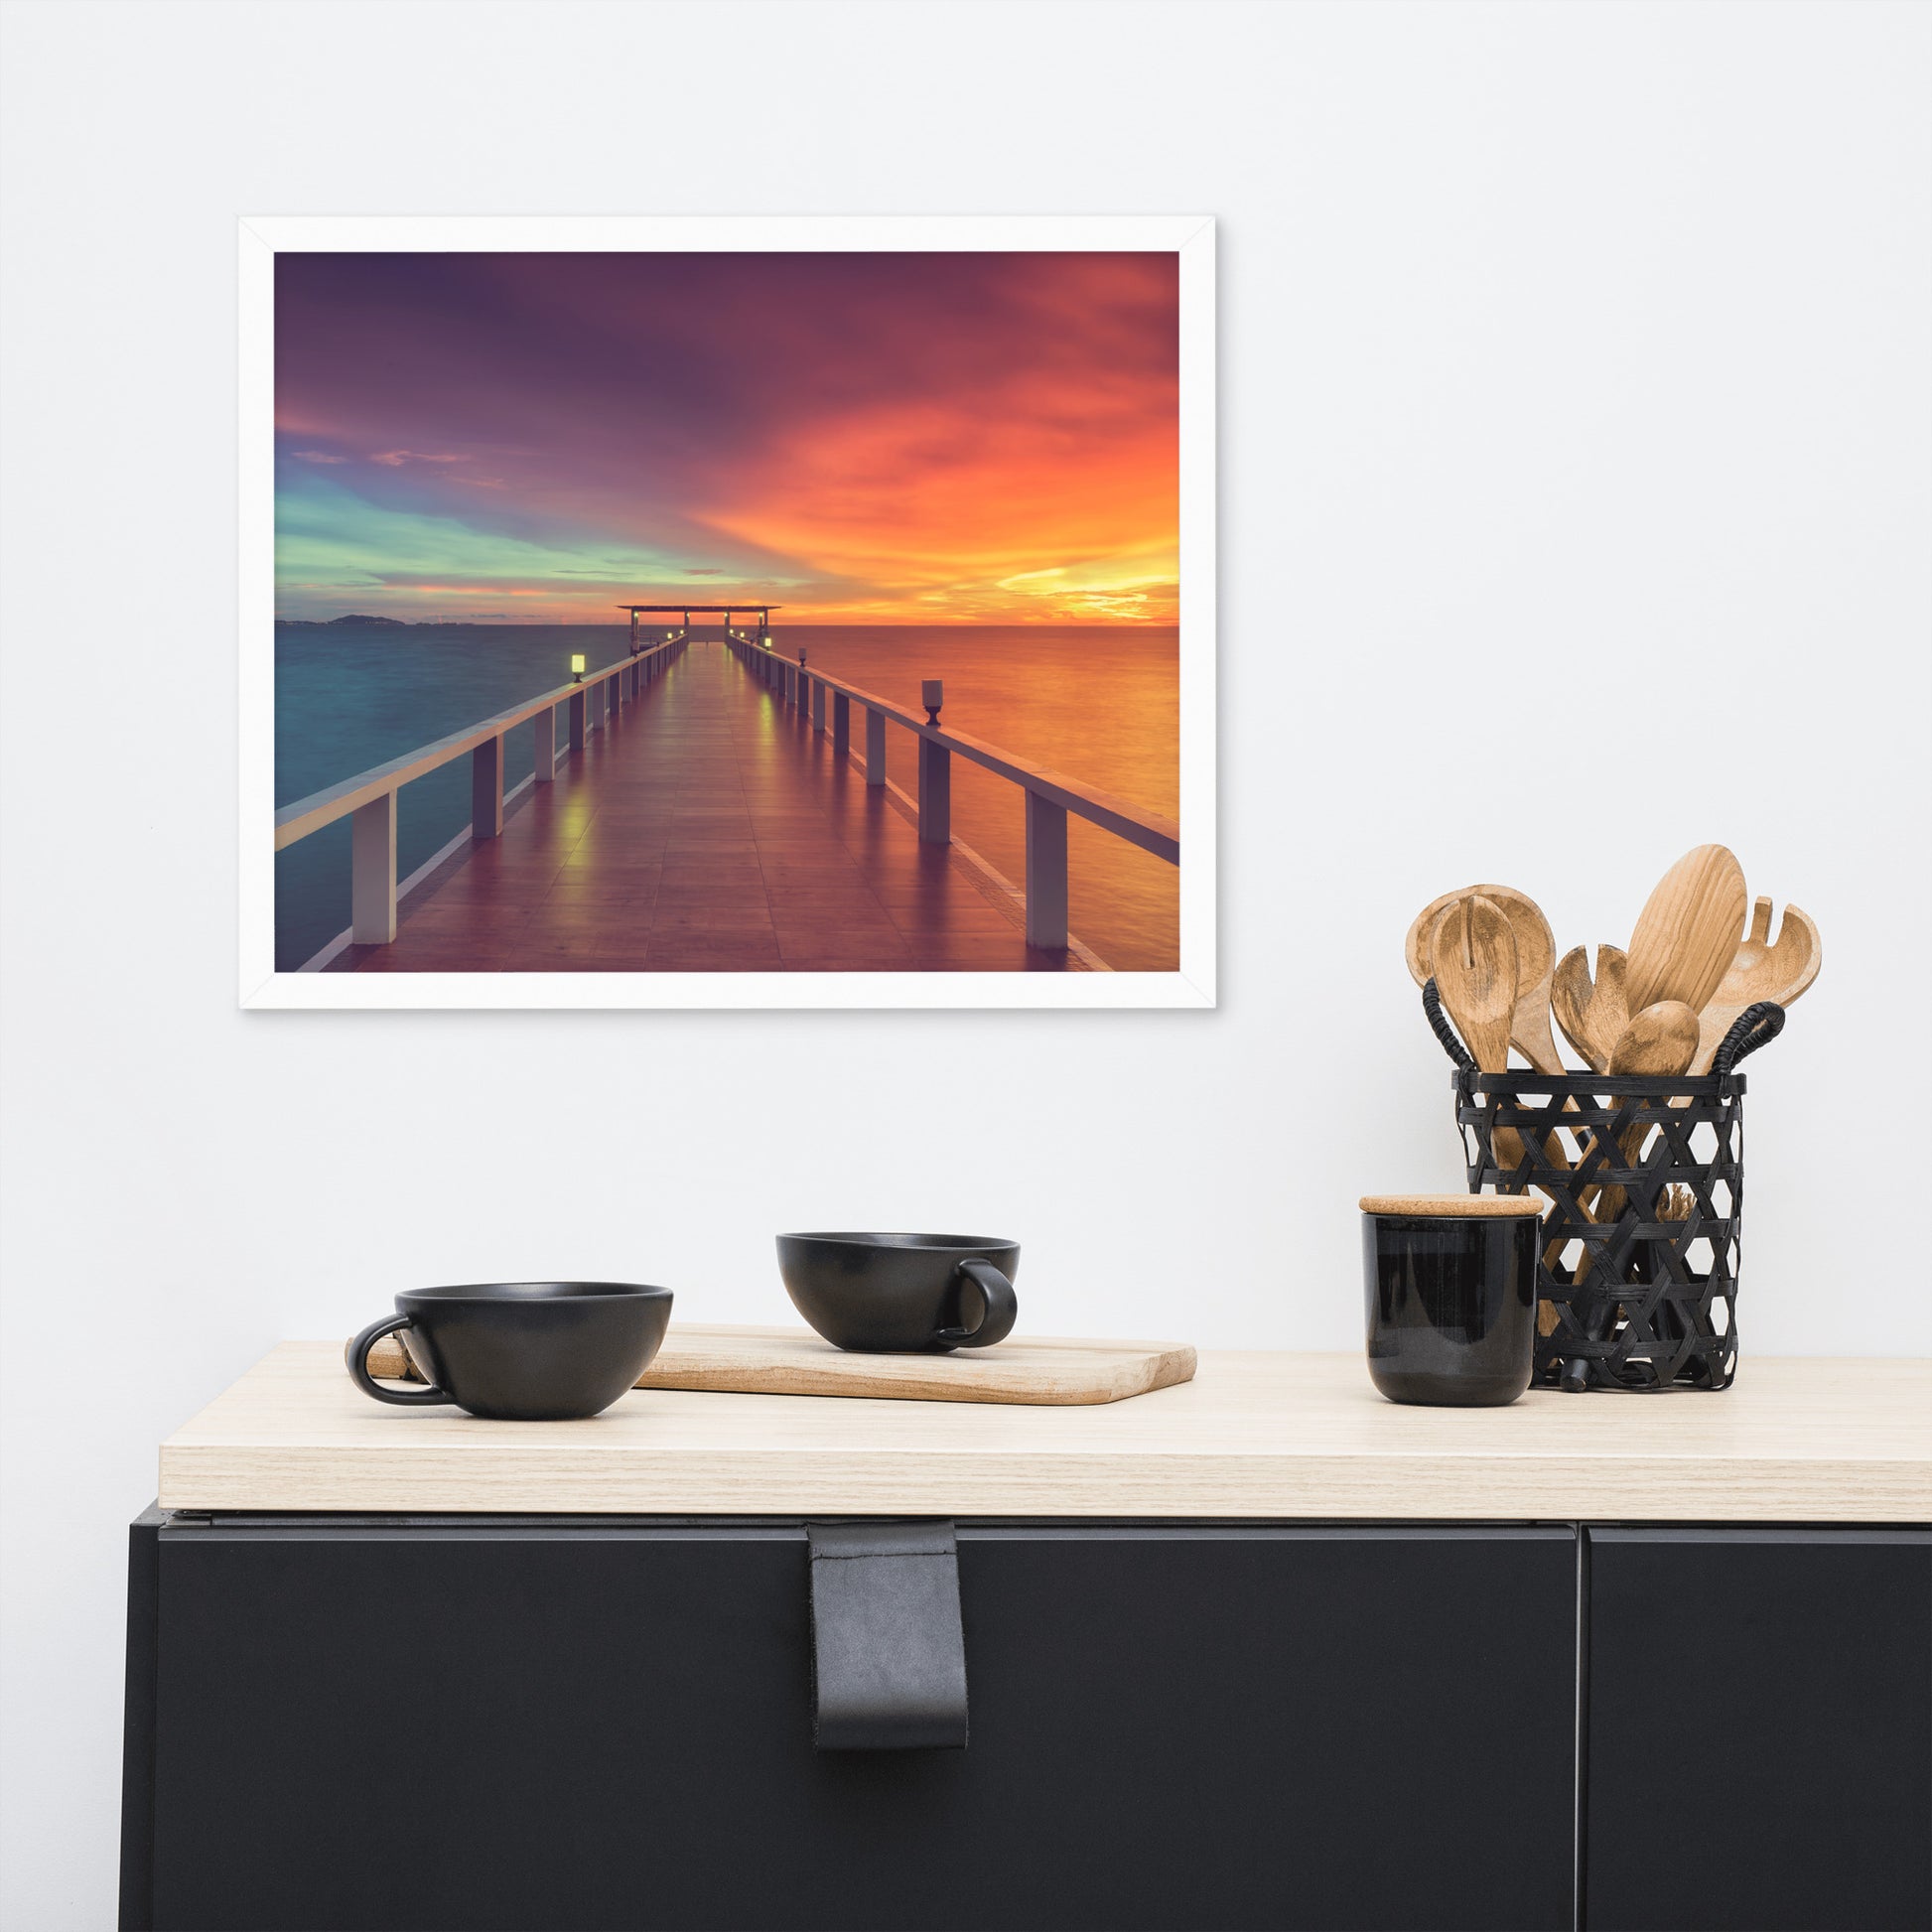 Framed Beach Photos: Surreal Wooden Pier At Sunset with Intrigued Effect - Coastal / Seascape / Nature / Landscape Photo Framed Artwork - Wall Decor